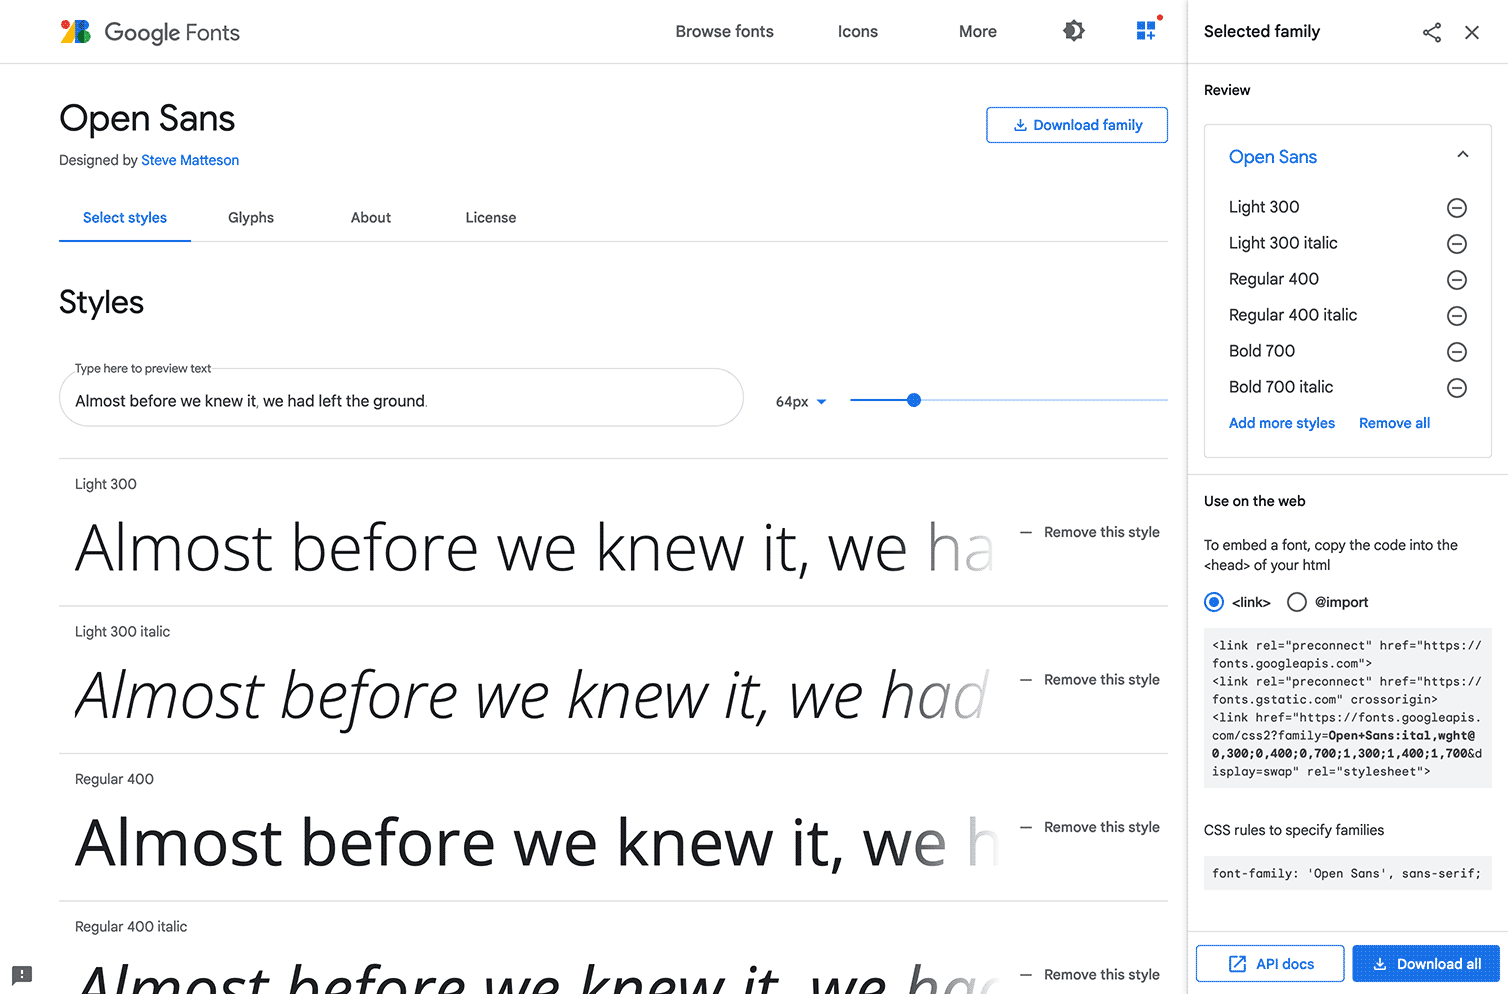 View of the Google Fonts interface with a listing of font weights and styles on the left. On the right is a listing of selected fonts weights and styles with code text below.